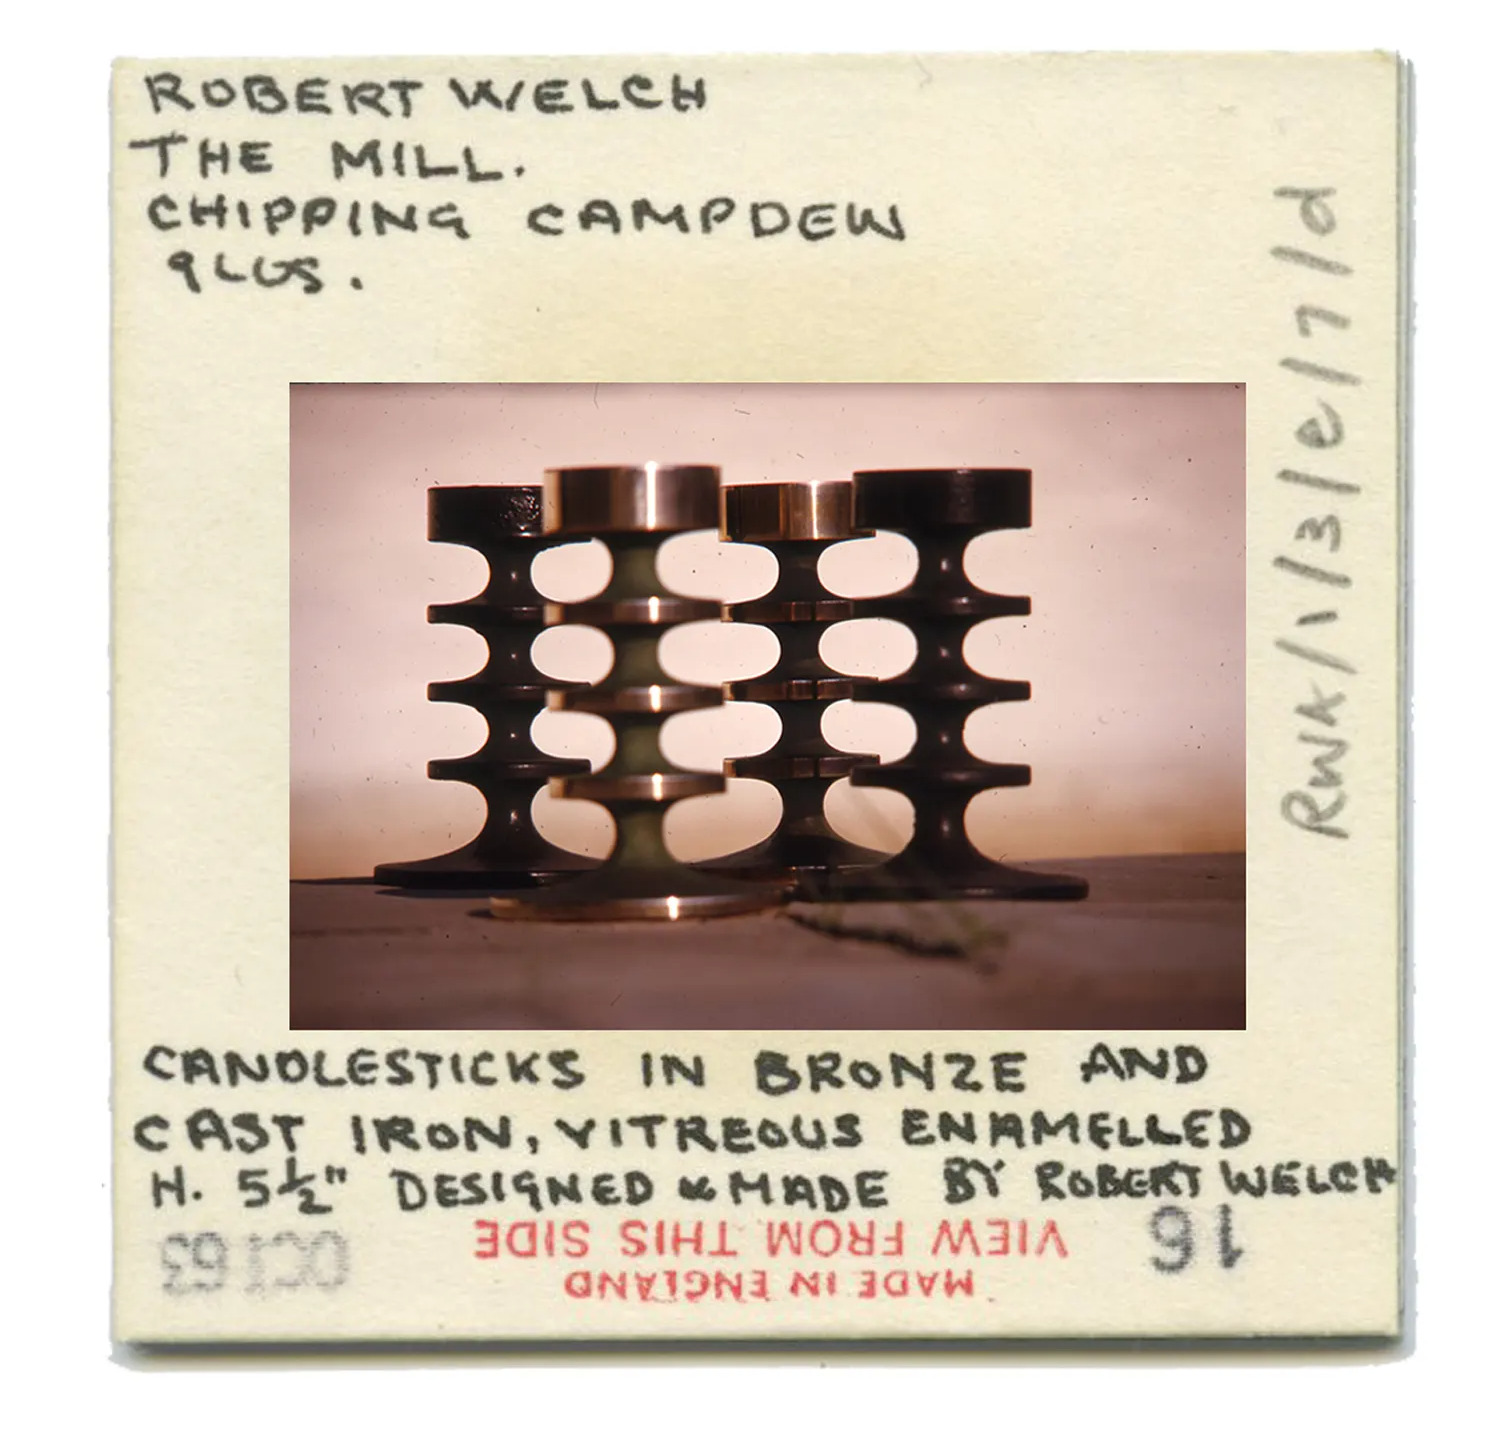 Annotated slide, October 1963. Candlesticks in bronze and cast iron, vitreous enamelled. H. 5 ½” Designed and made by Robert Welch